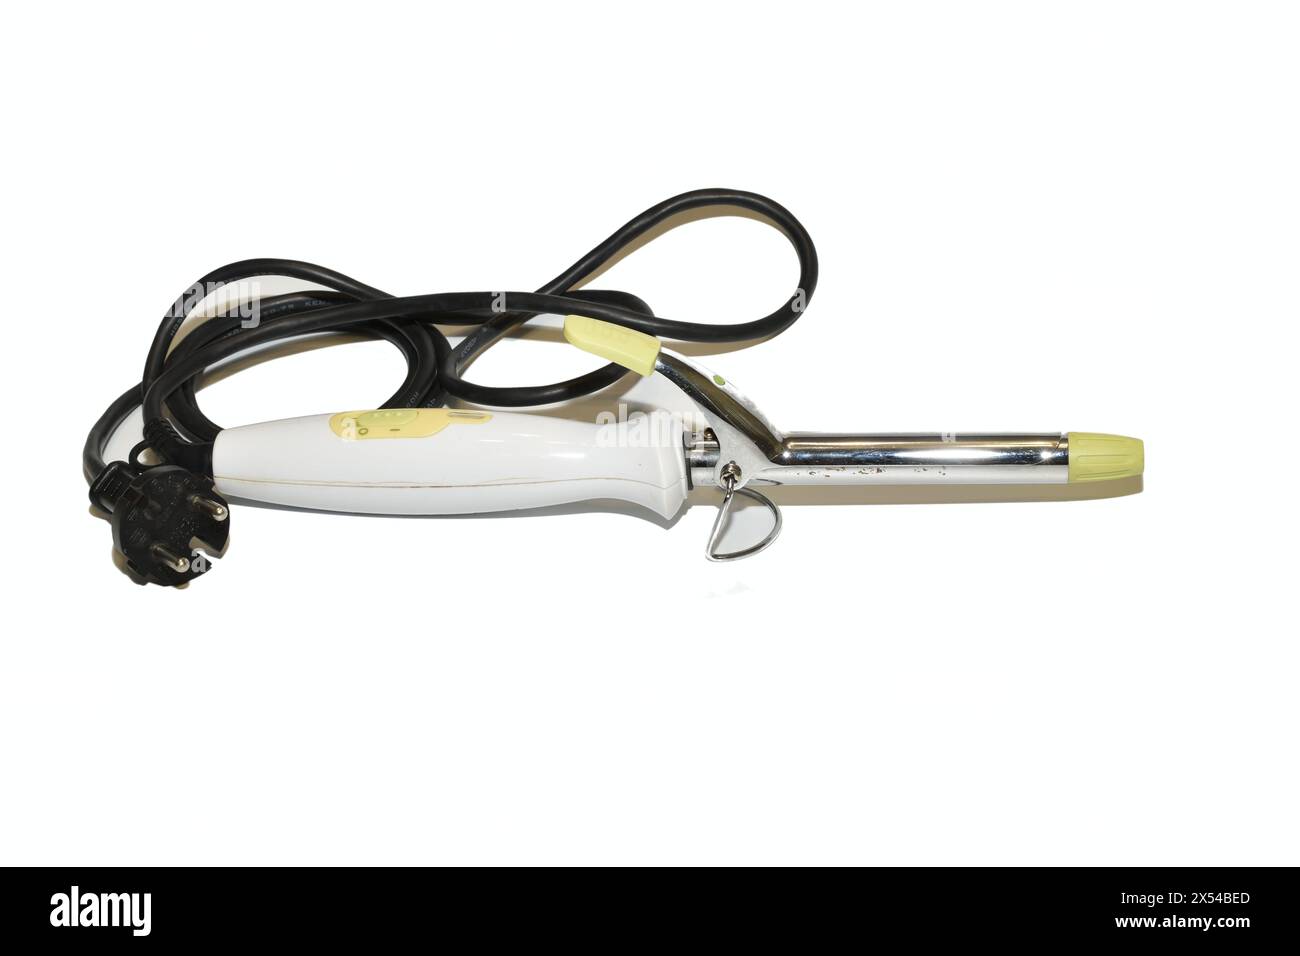 Electric hair curling iron lies on a white background. Stock Photo